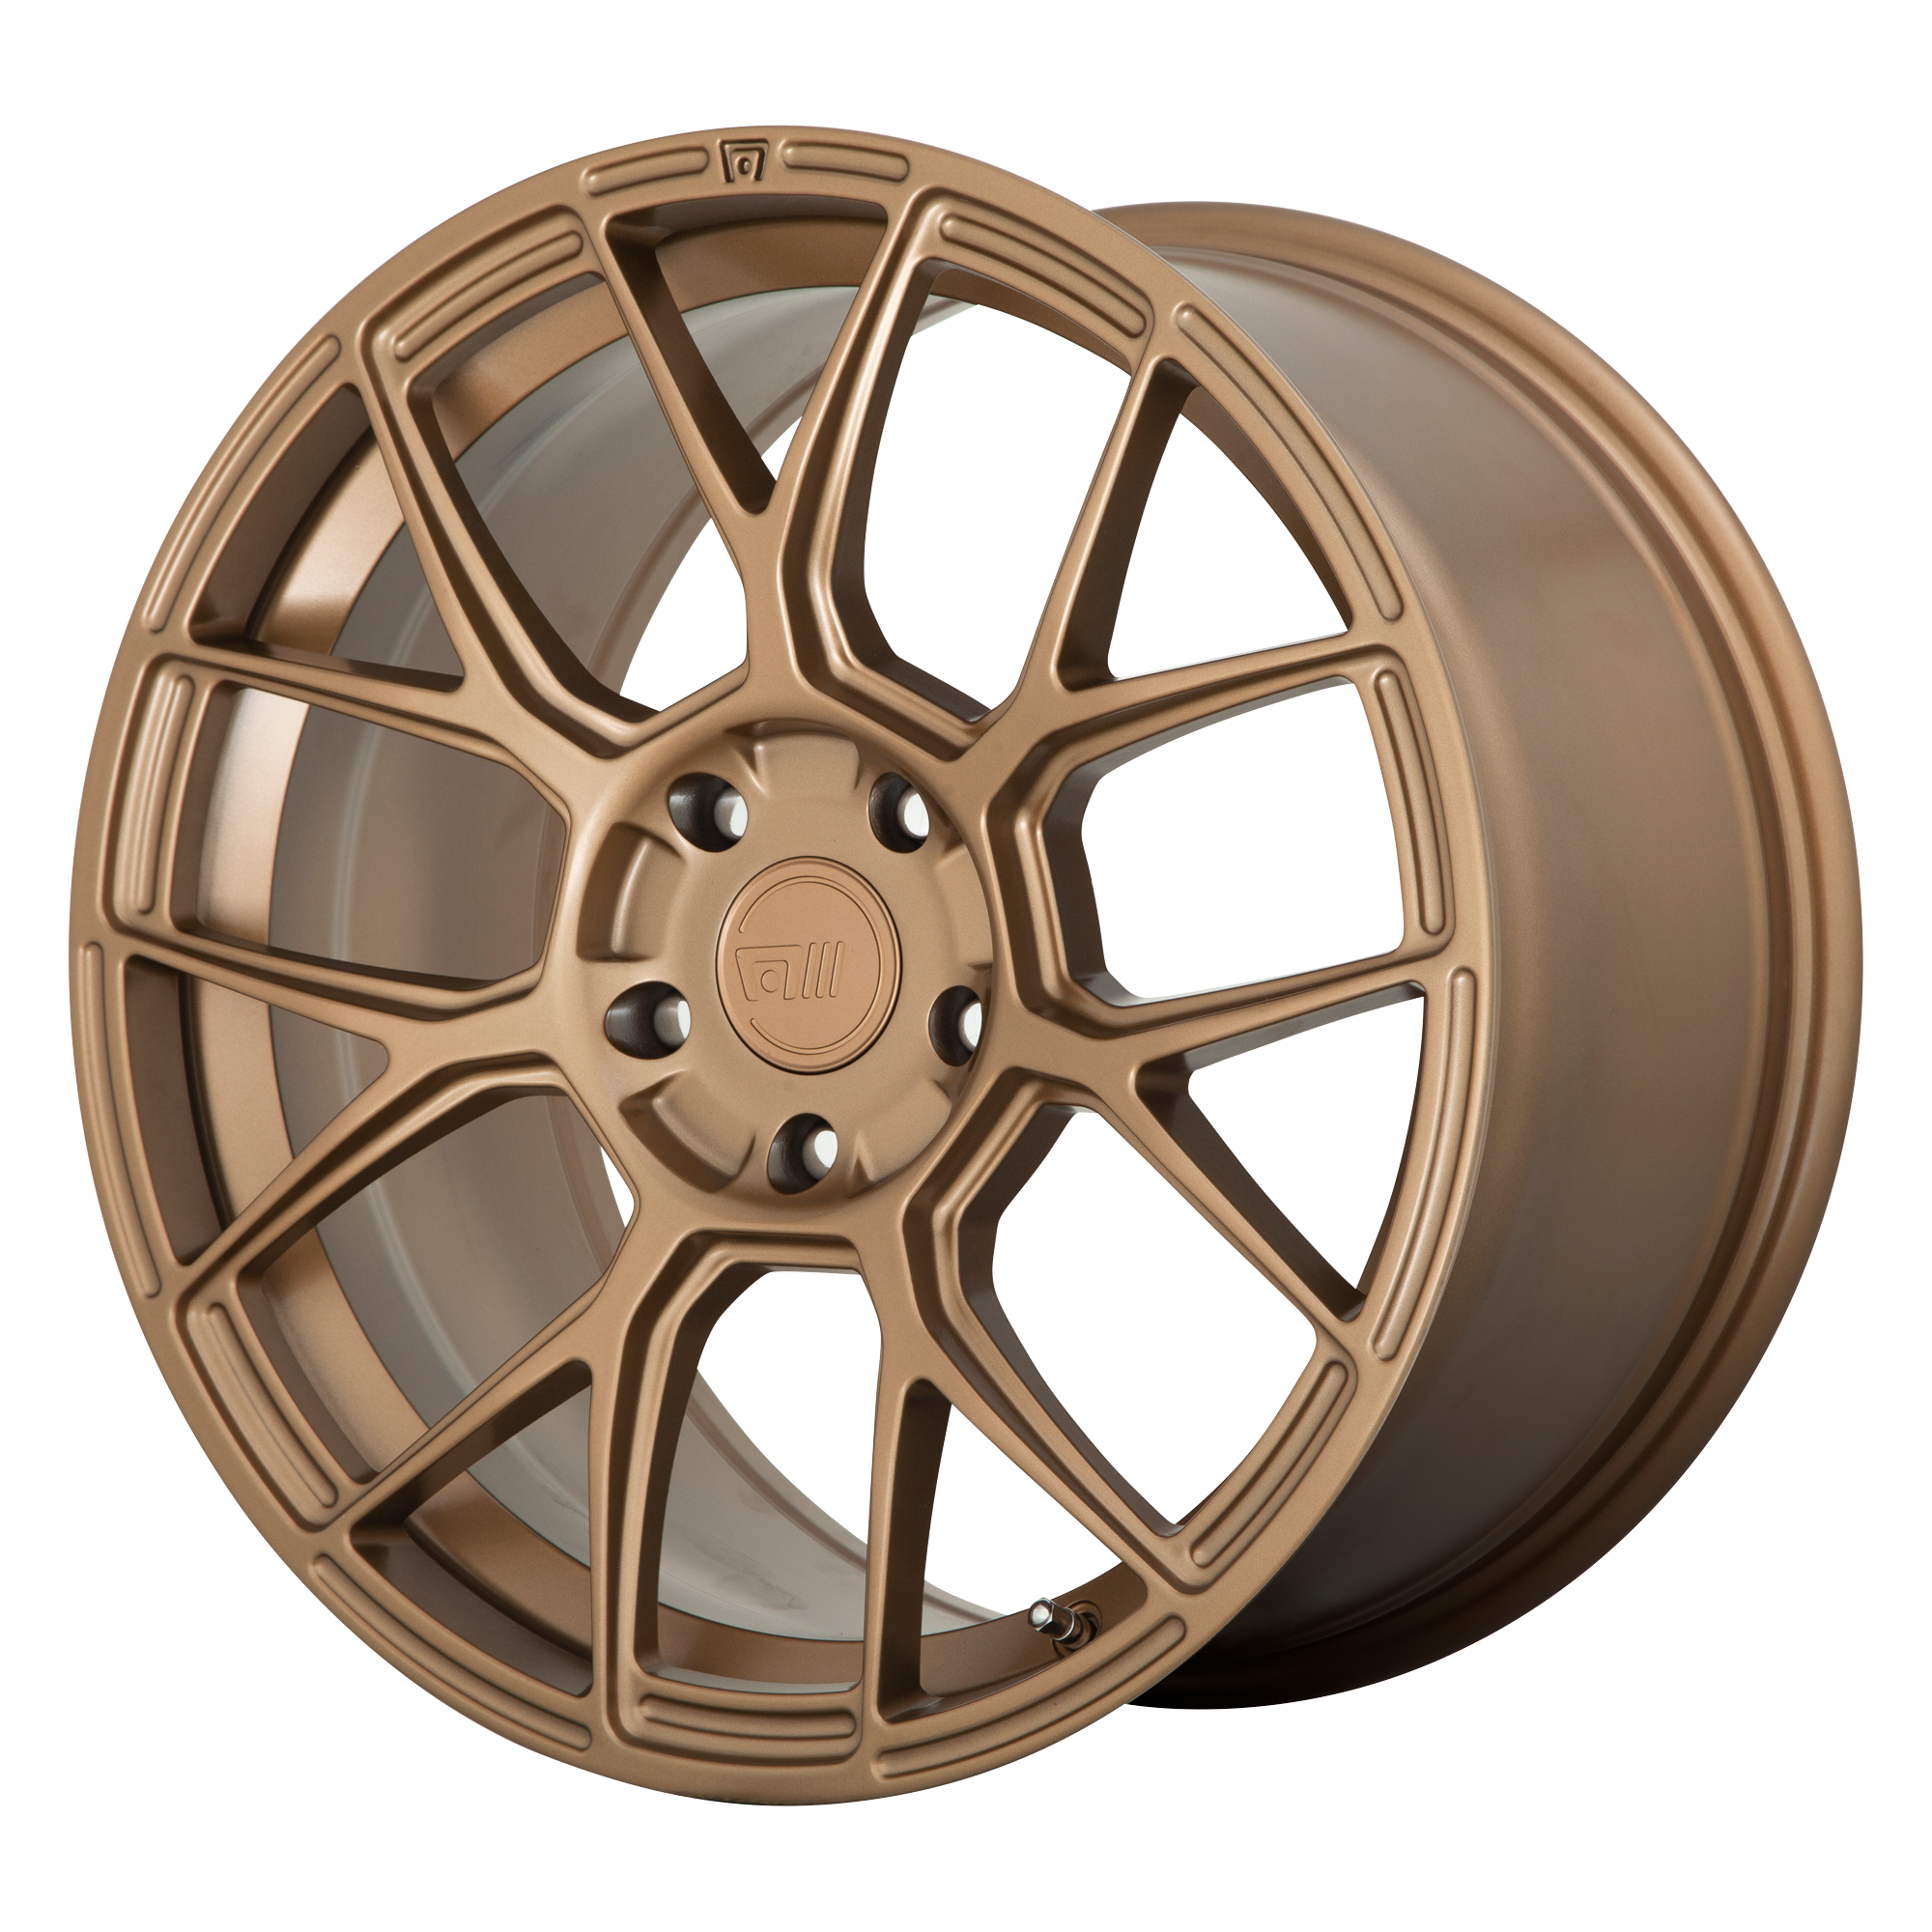 CM7 18x9.5 5x120.00 MATTE BRONZE (45 mm) - Tires and Engine Performance